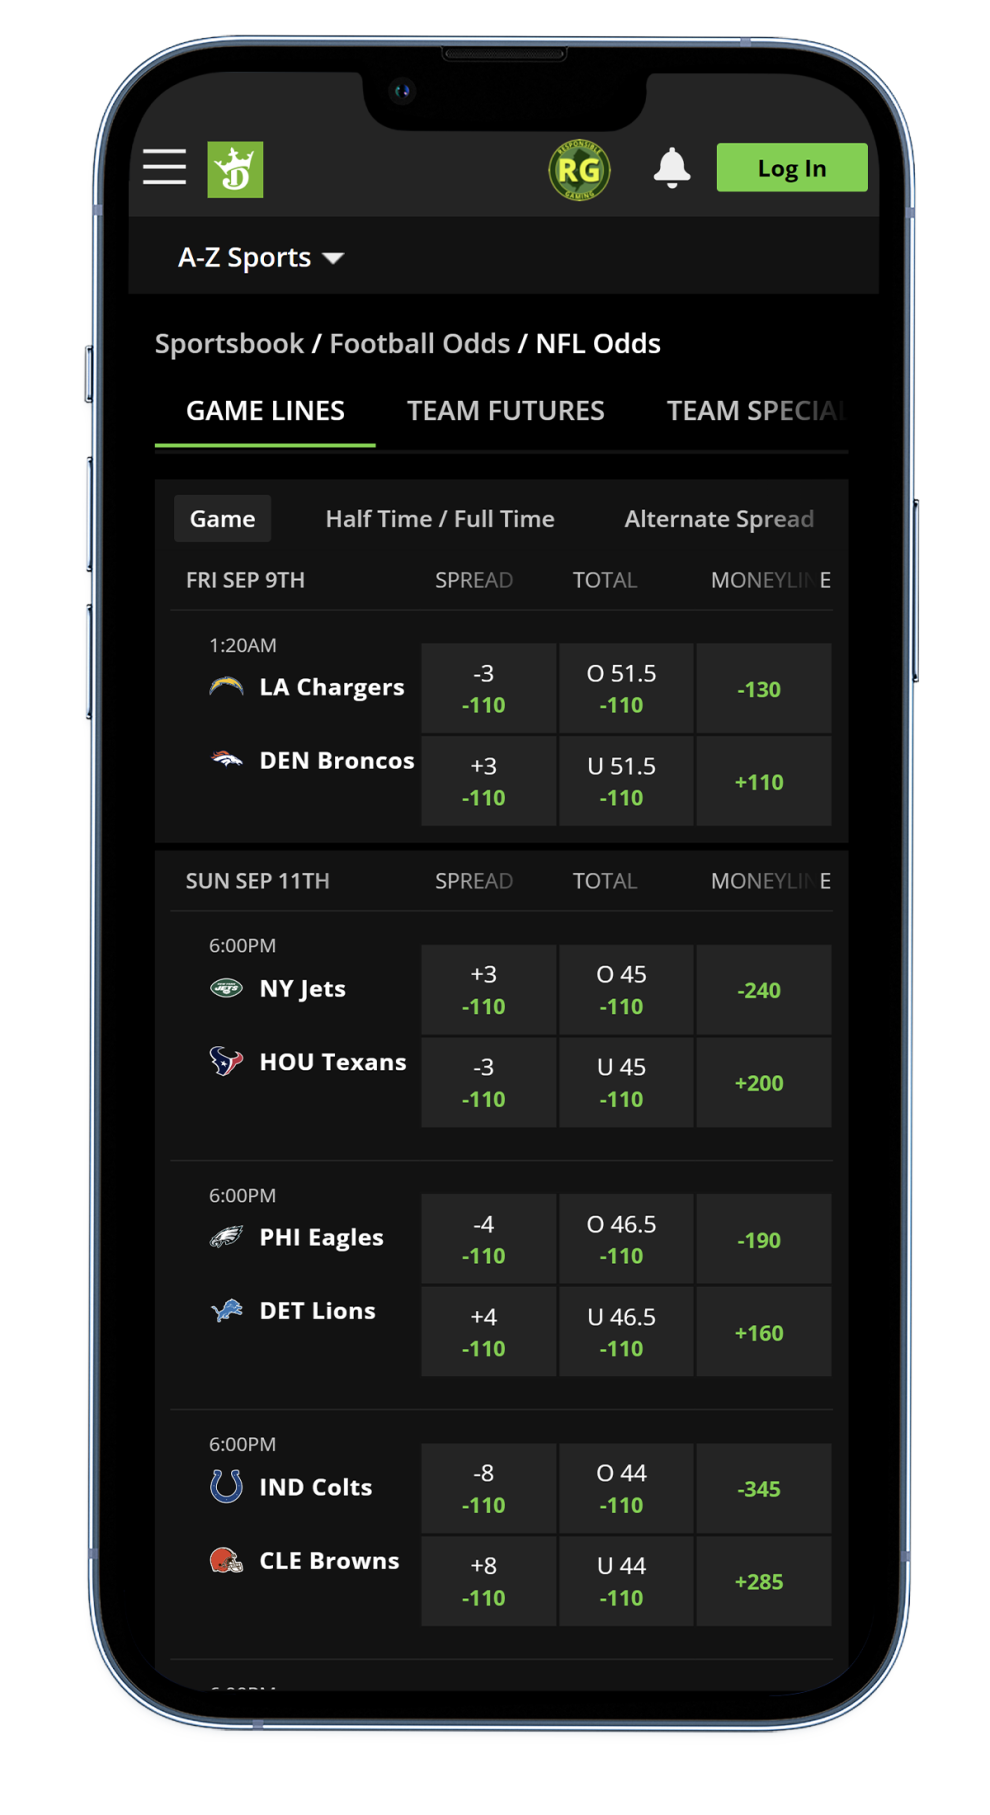 NFL Parlay Betting Guide - Understand NFL Parlay Bets